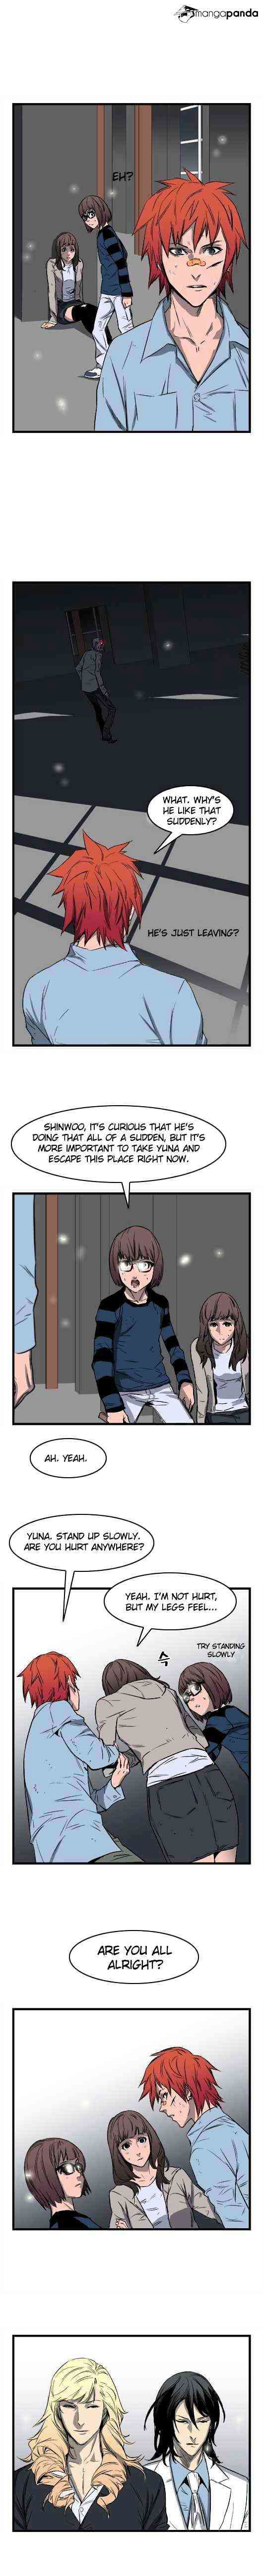 Noblesse Chapter 34 page 5